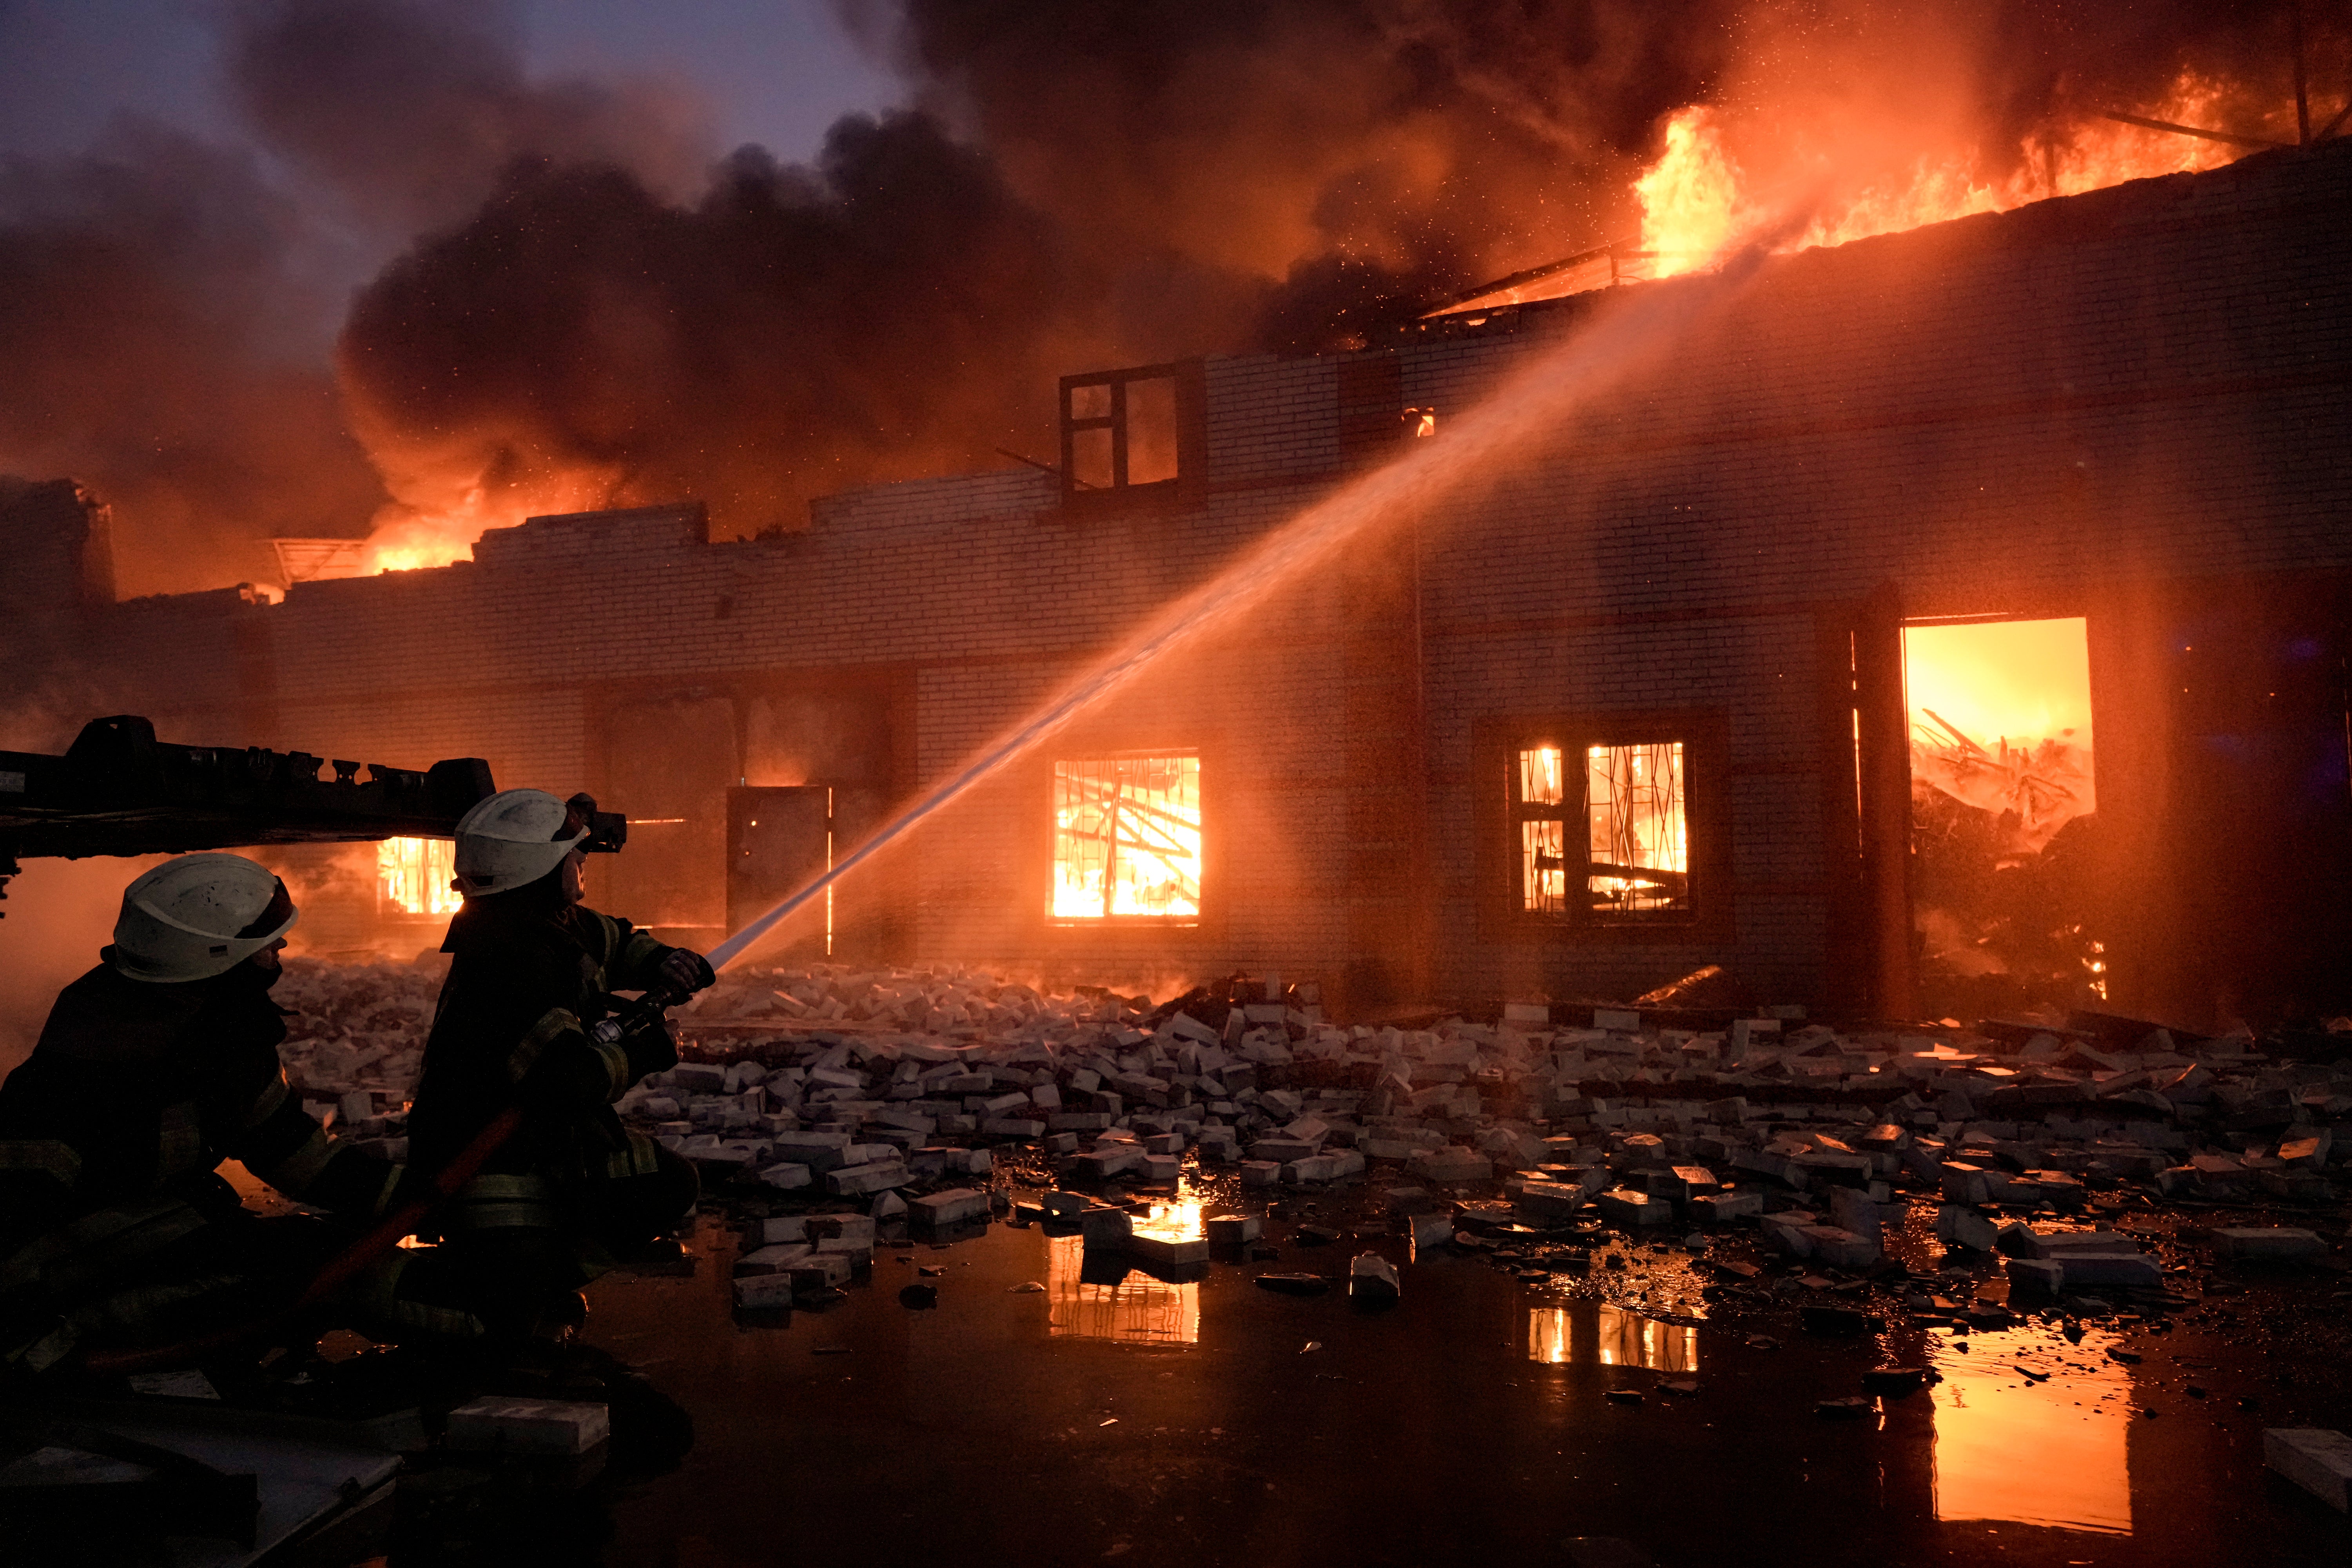 Ukrainian firefighters extinguish a blaze at a warehouse after a bombing on the outskirts of Kyiv, Ukraine, Thursday, March 17, 2022.